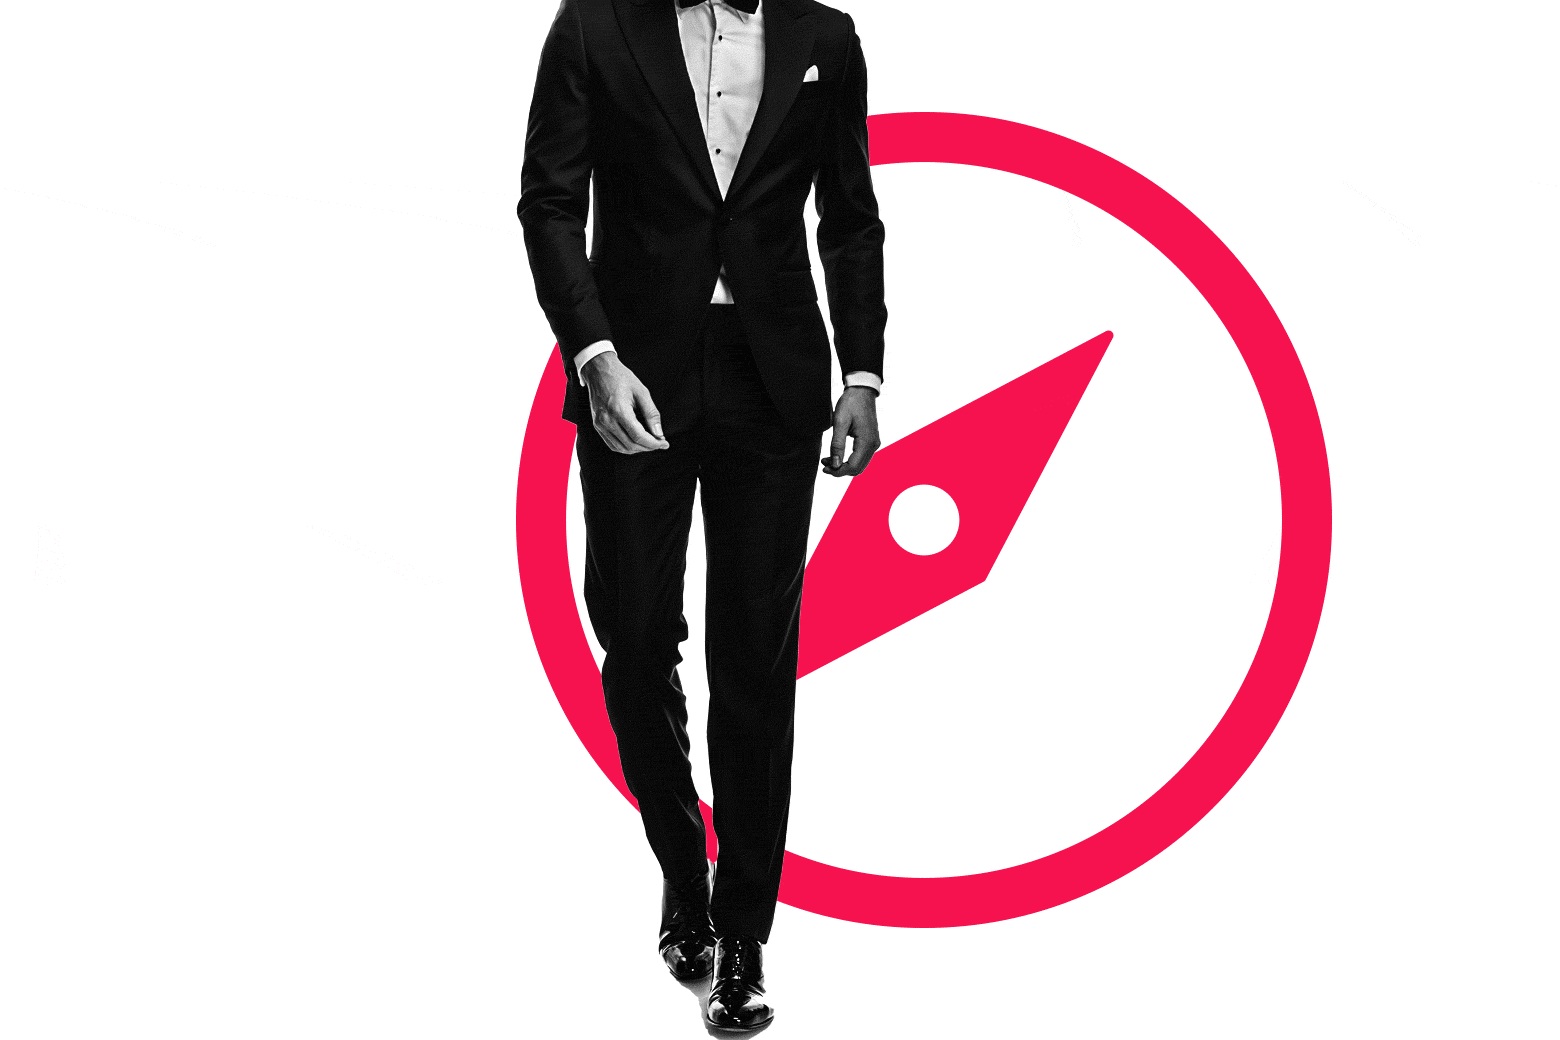 The lower body of a man in a suit with a compass behind him.